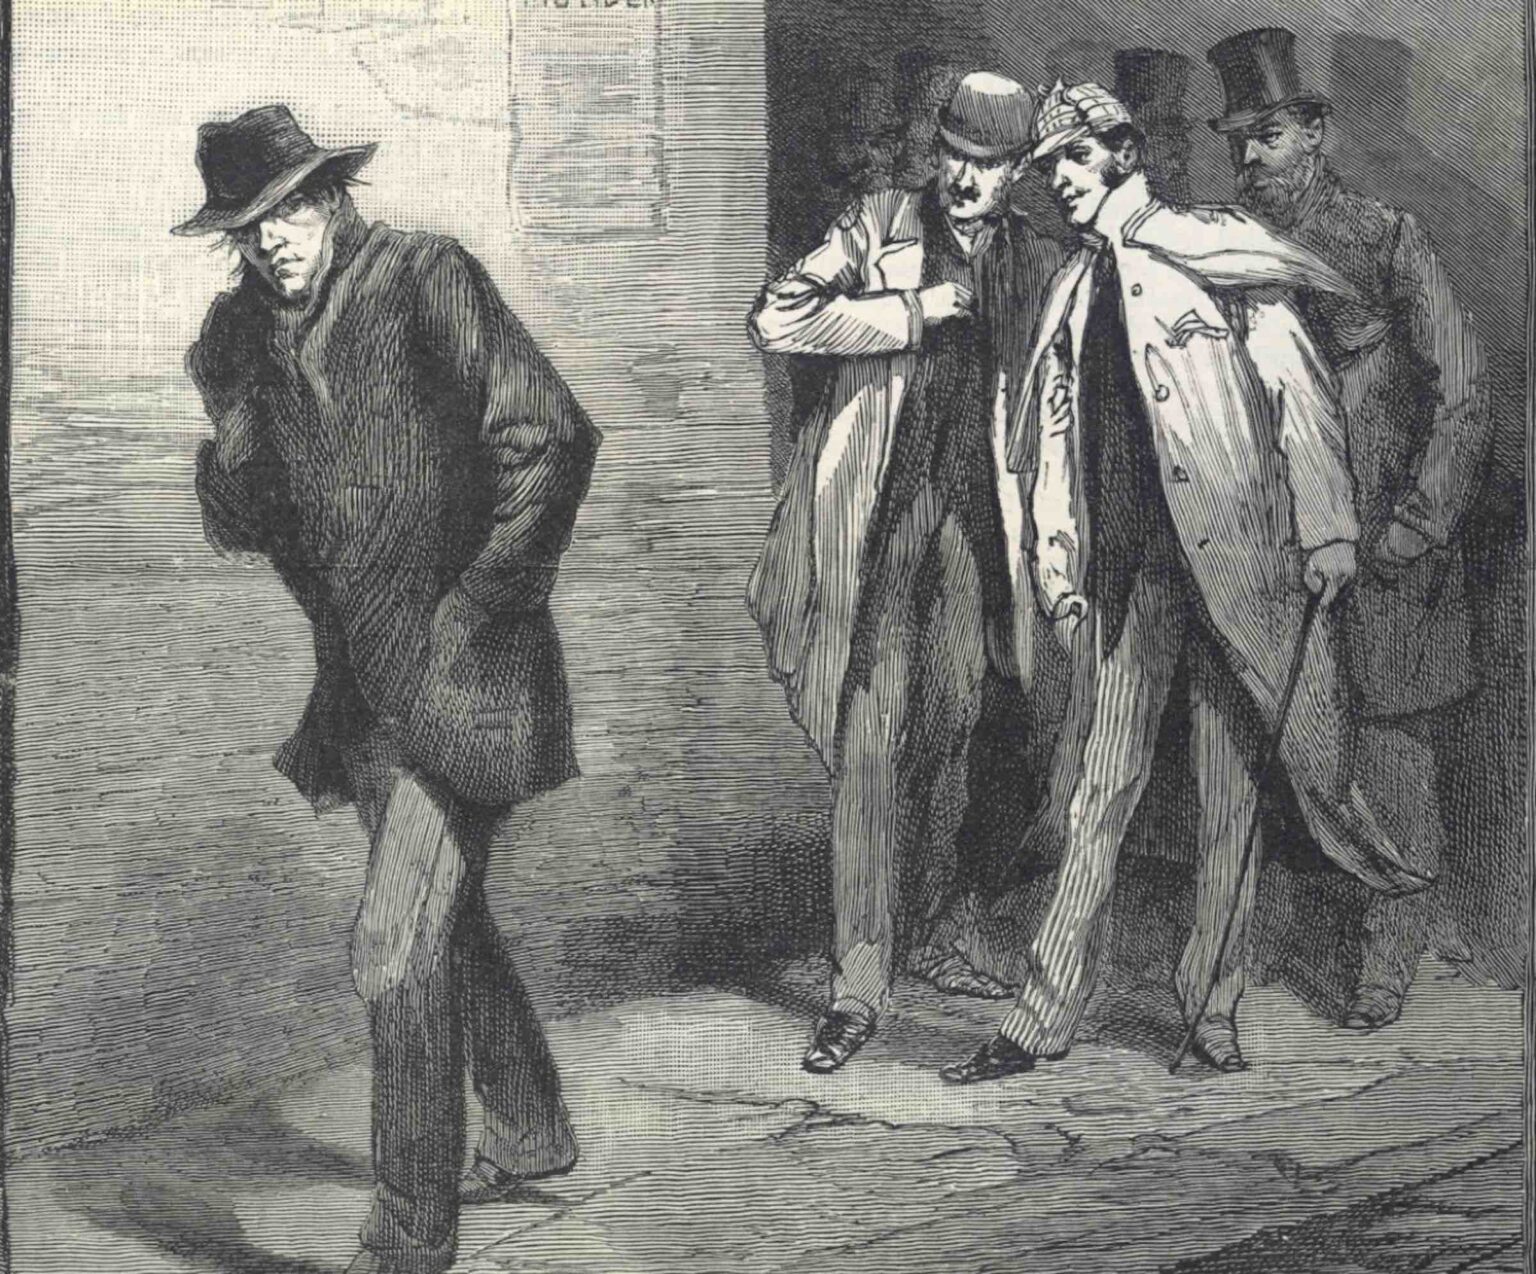 Jack the Ripper is the serial killer to which all other serial killers are held up to. Who's Jack the Ripper? Let's find out!